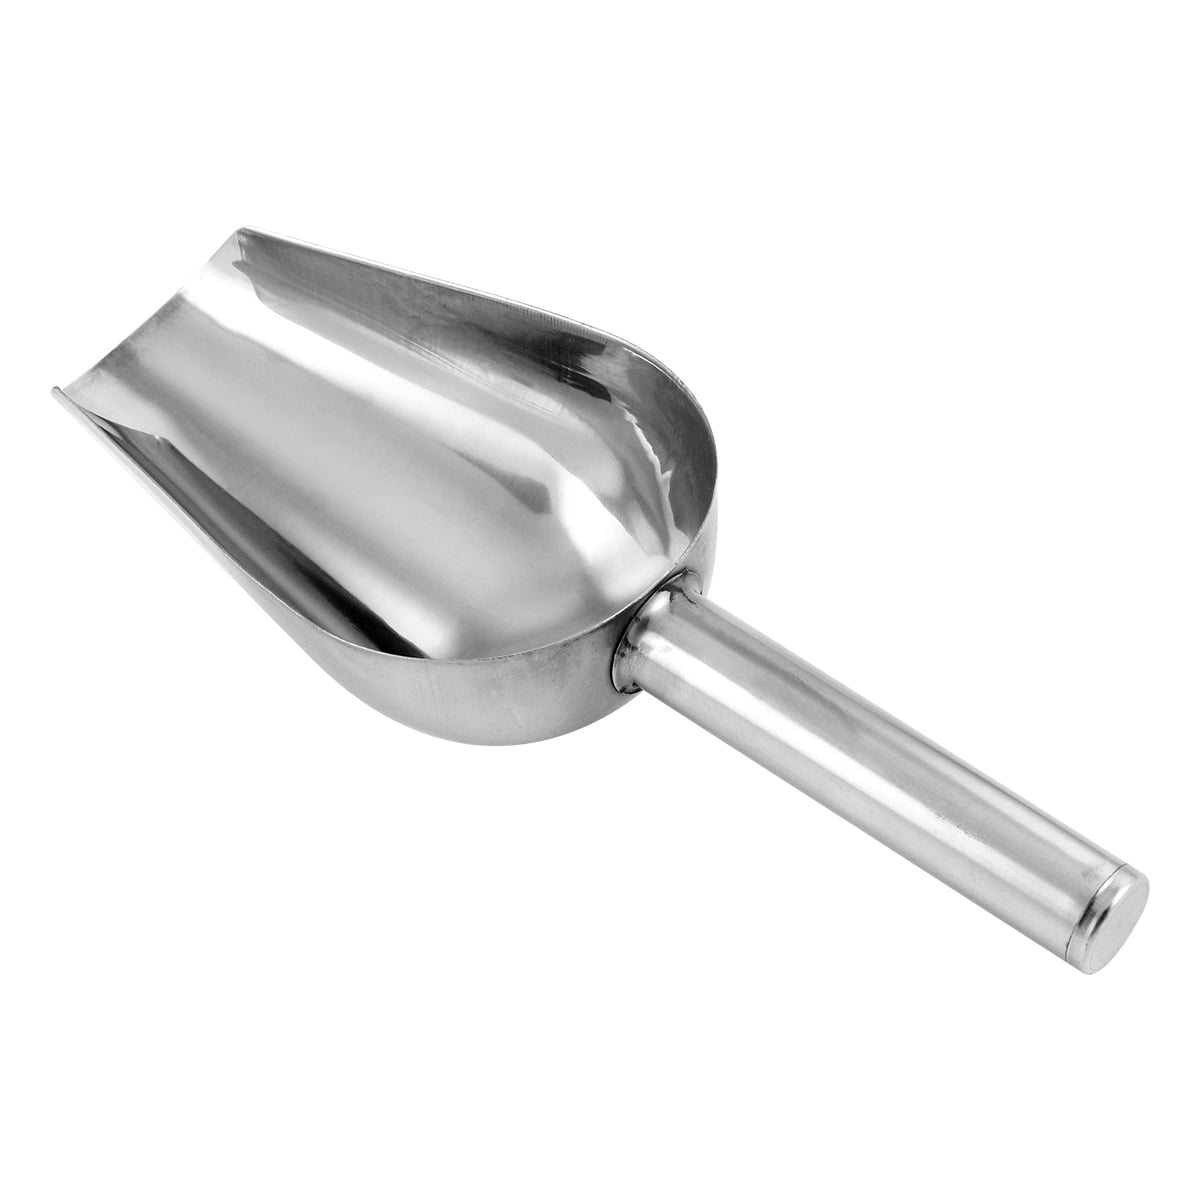 Popcorn Scoop, Stainless Steel Popcorn Scoop Hand Fill Tool for Bags &  Boxes, Kernel Sifting Speed Scoop for Commercial and Home Use Great Utility